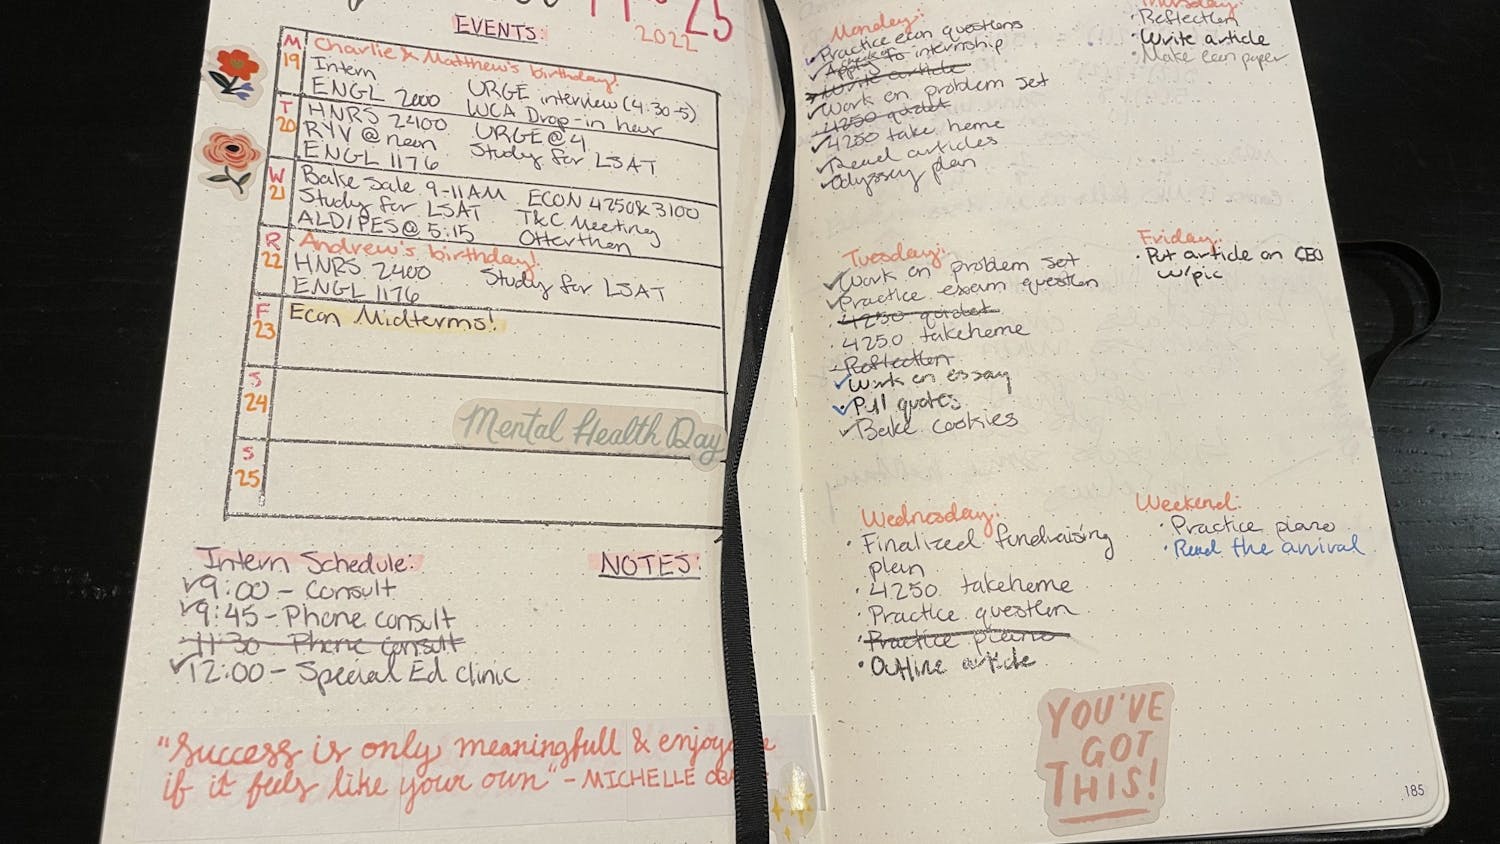 A bullet-pointed journal of one student's responsibilities for a week